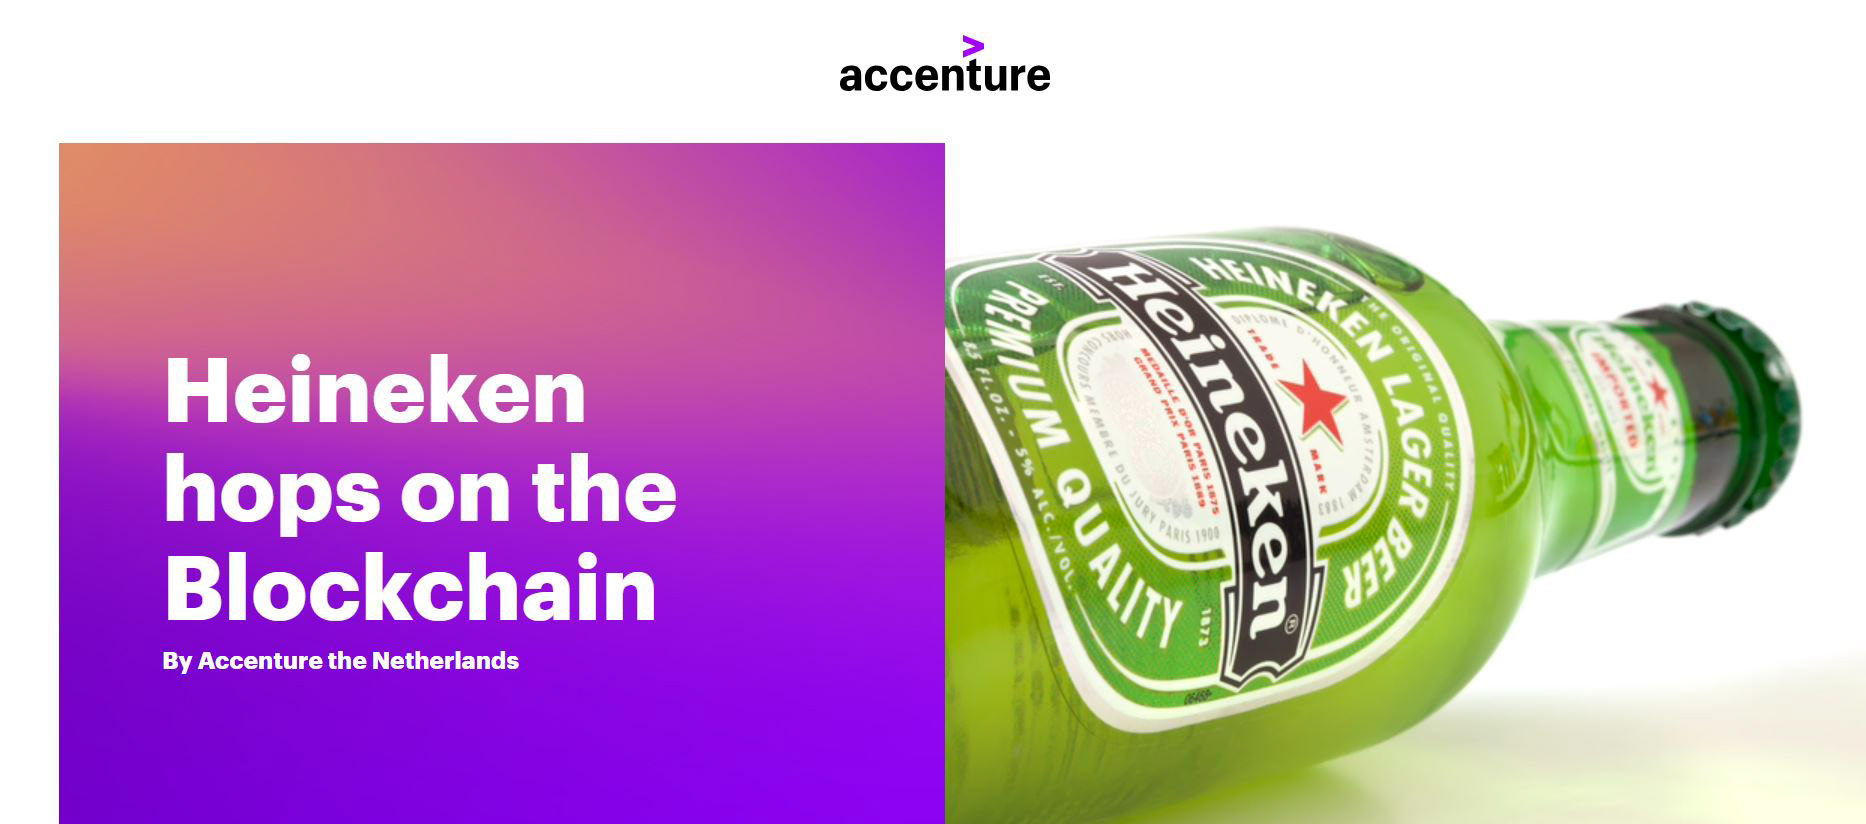 Our proposal was then adopted by Accenture for implementation